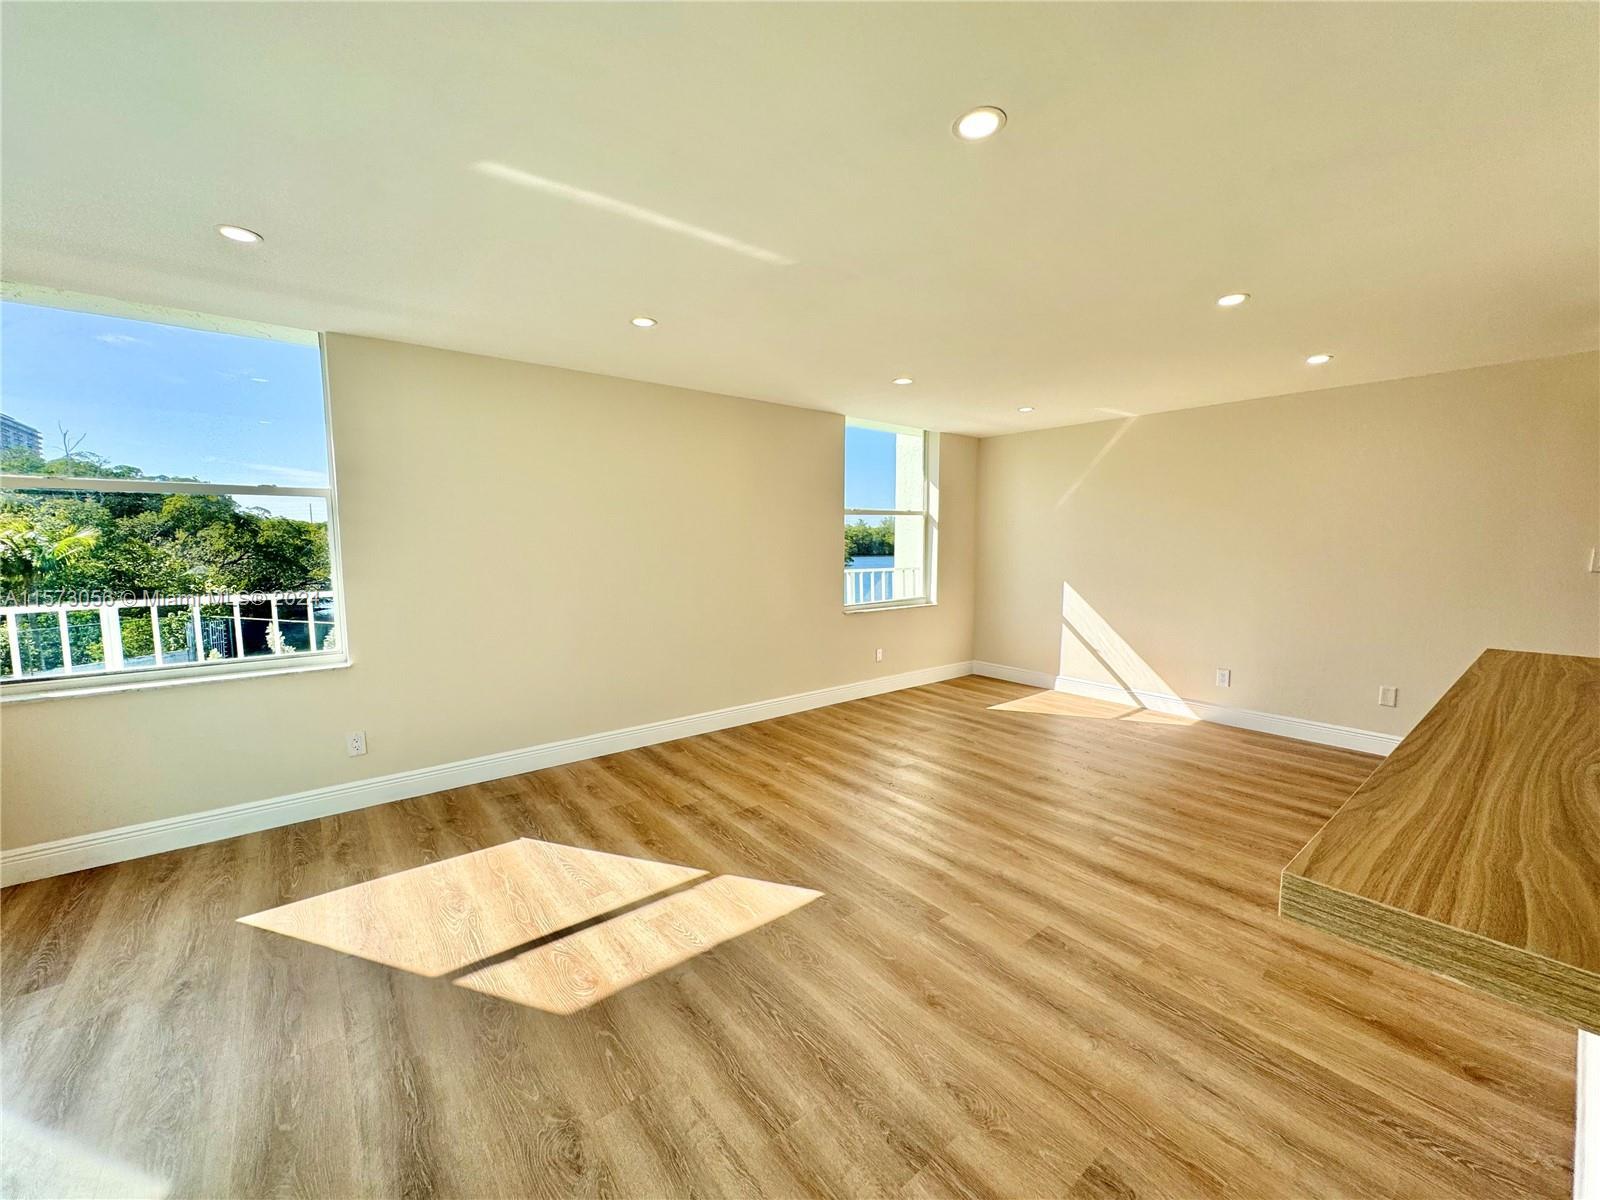 Investing opportunity! Building is being renovated. Price reduced to sell.

Live the Miami lifesty